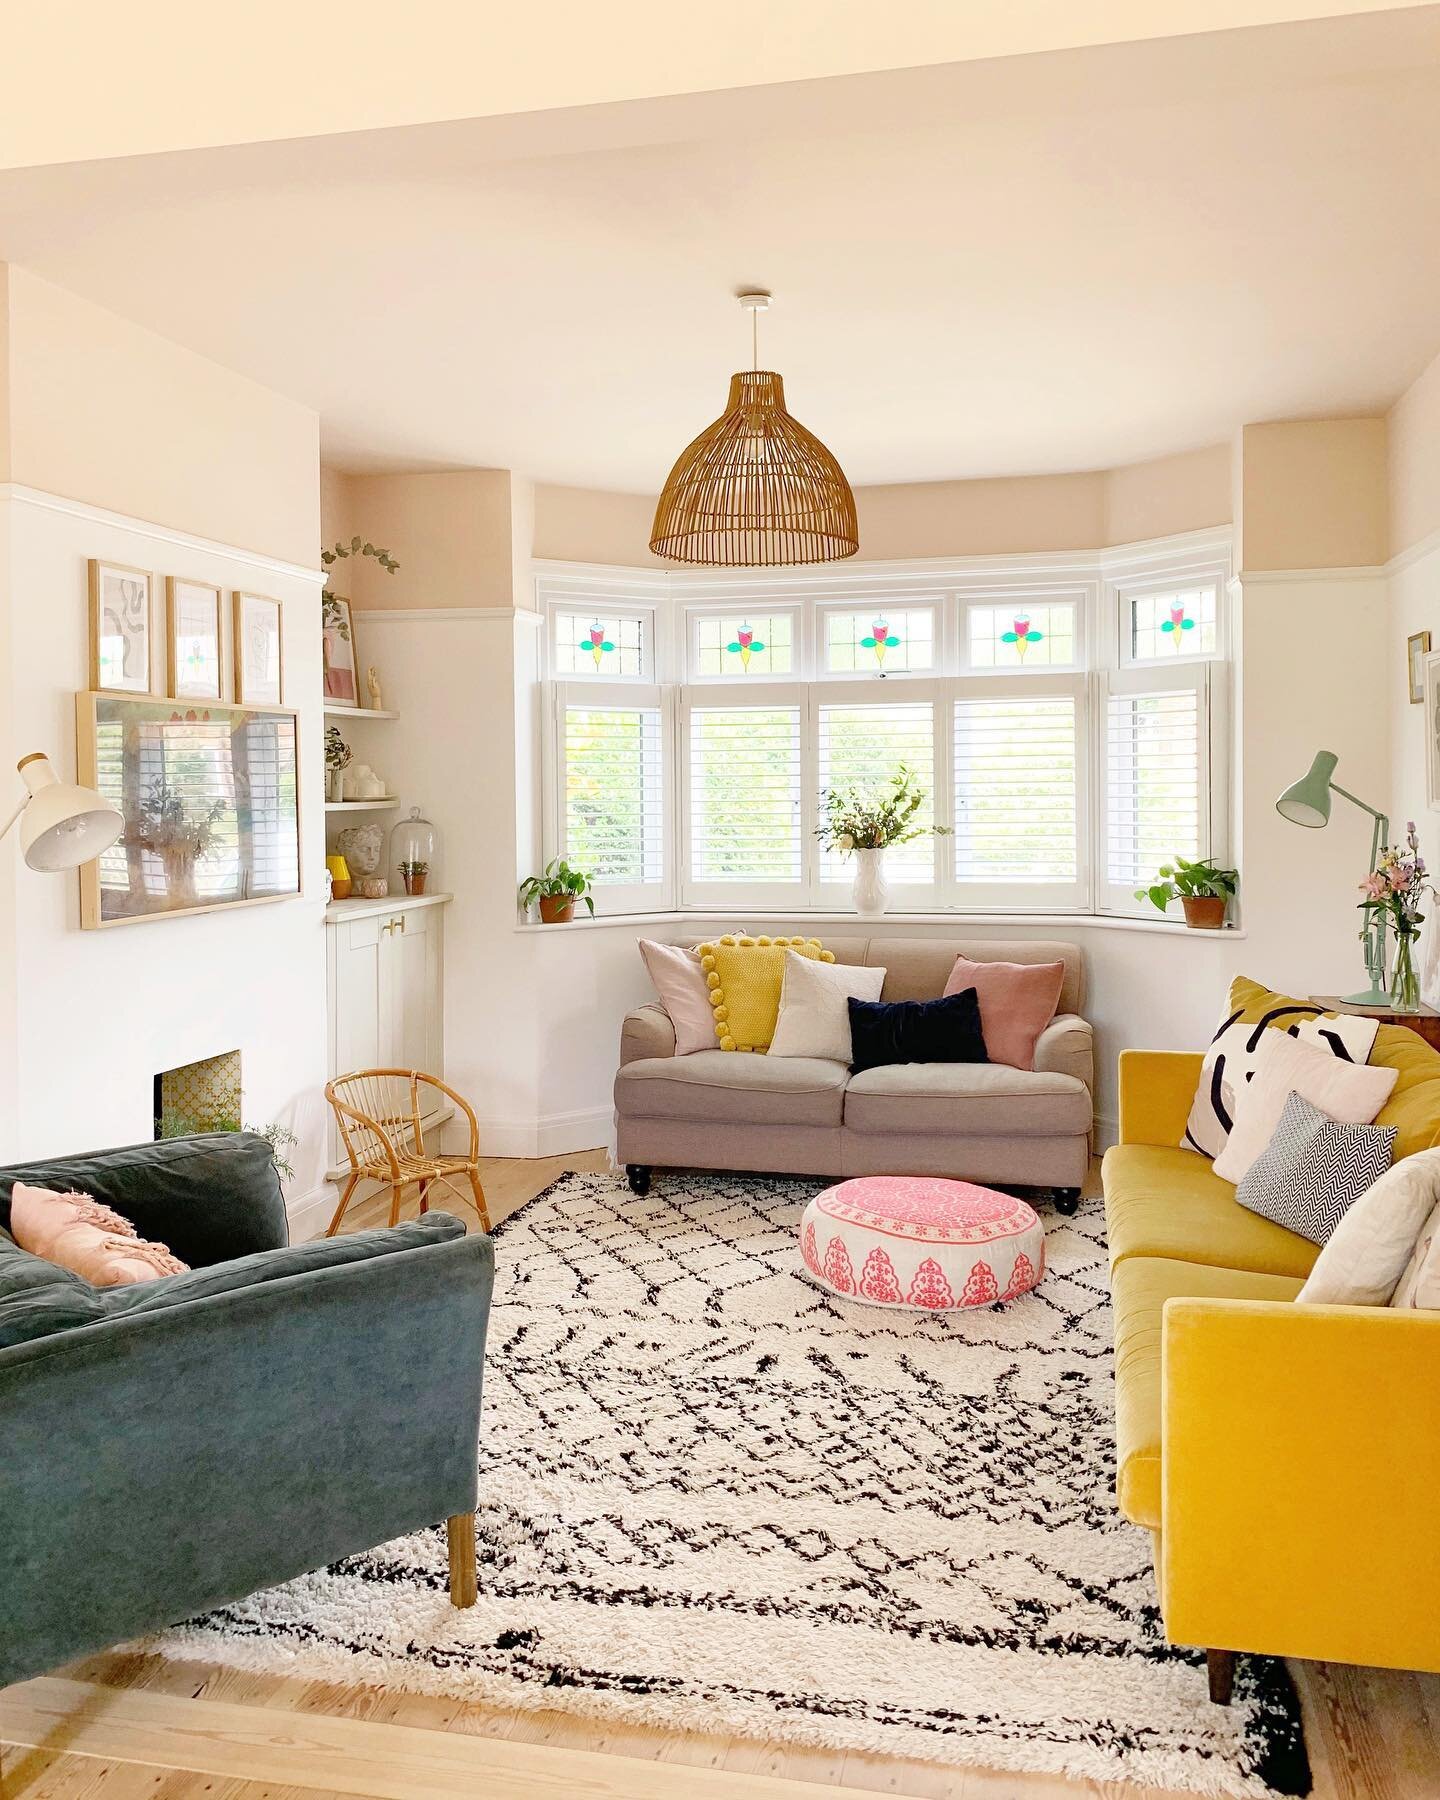 So the renovation is complete and you&rsquo;re now wondering how much it will cost to furnish your home?

From black-out blinds to shelves, sofas and ceiling lights, in the second part of this budget series over on my blog, I have revealed how much w